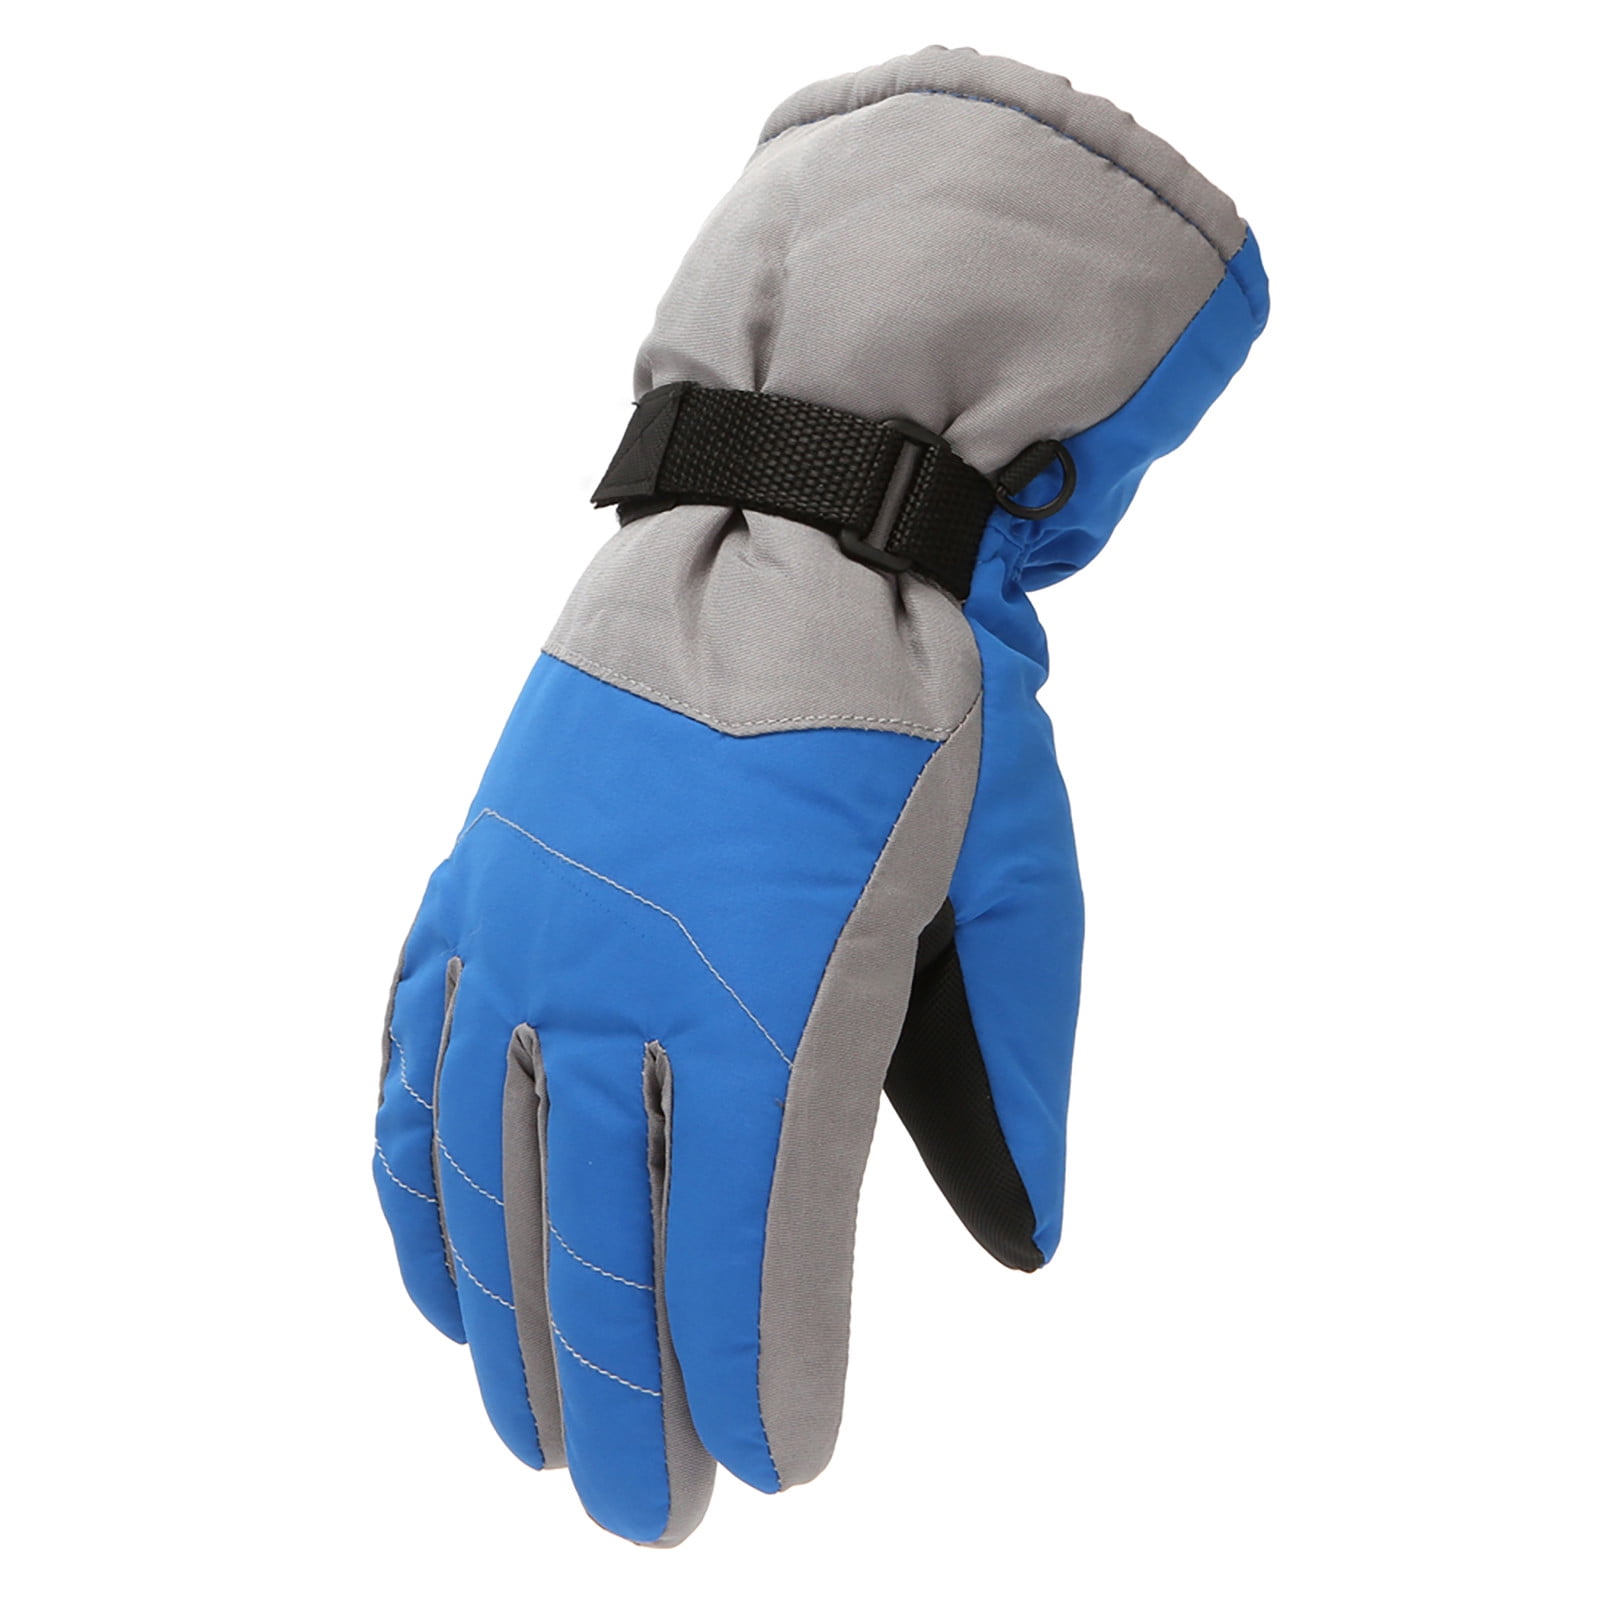 Waterproof Ski Gloves Winter Windproof Snow Gloves Cotton Gloves for Skiing Snowboarding Outdoor Sports Necessary Full Finger Winter Gloves Women Winter Gloves for Teenagers Winter Full Finger Gloves